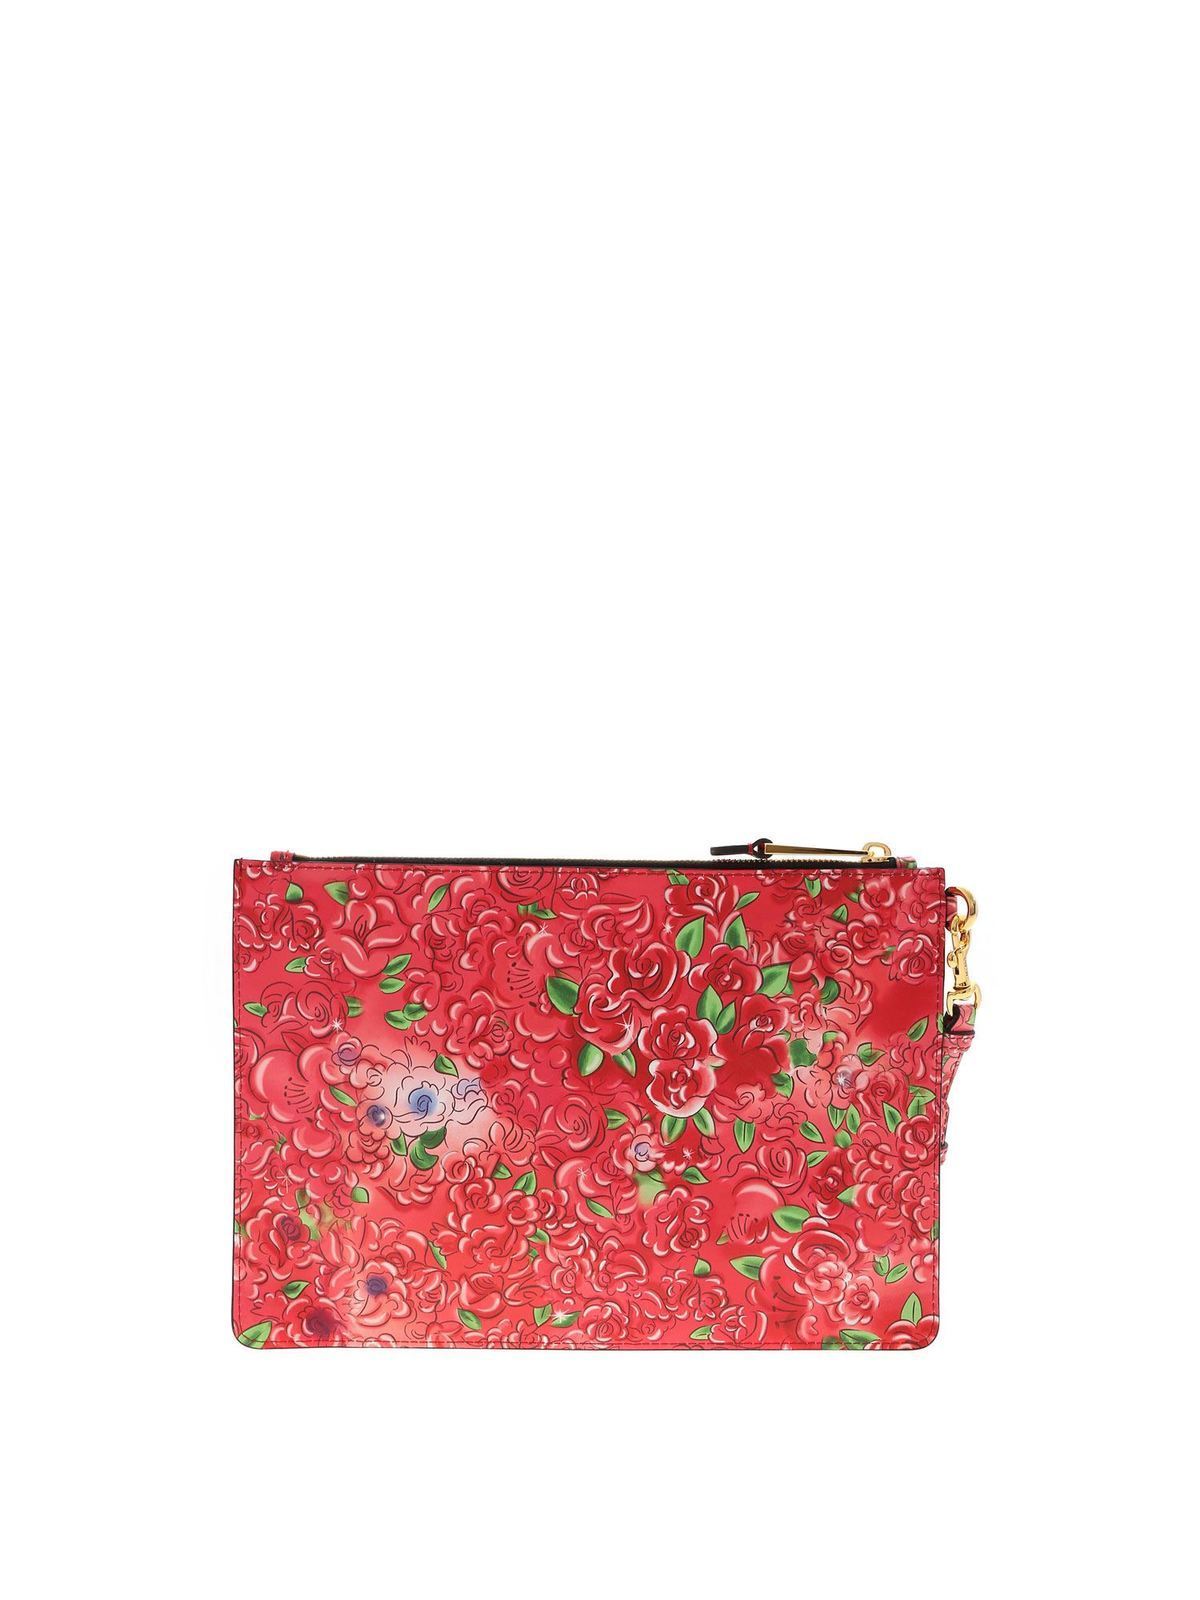 Clutches Moschino - Marie Antoinette anime clutch in red - 842780281888